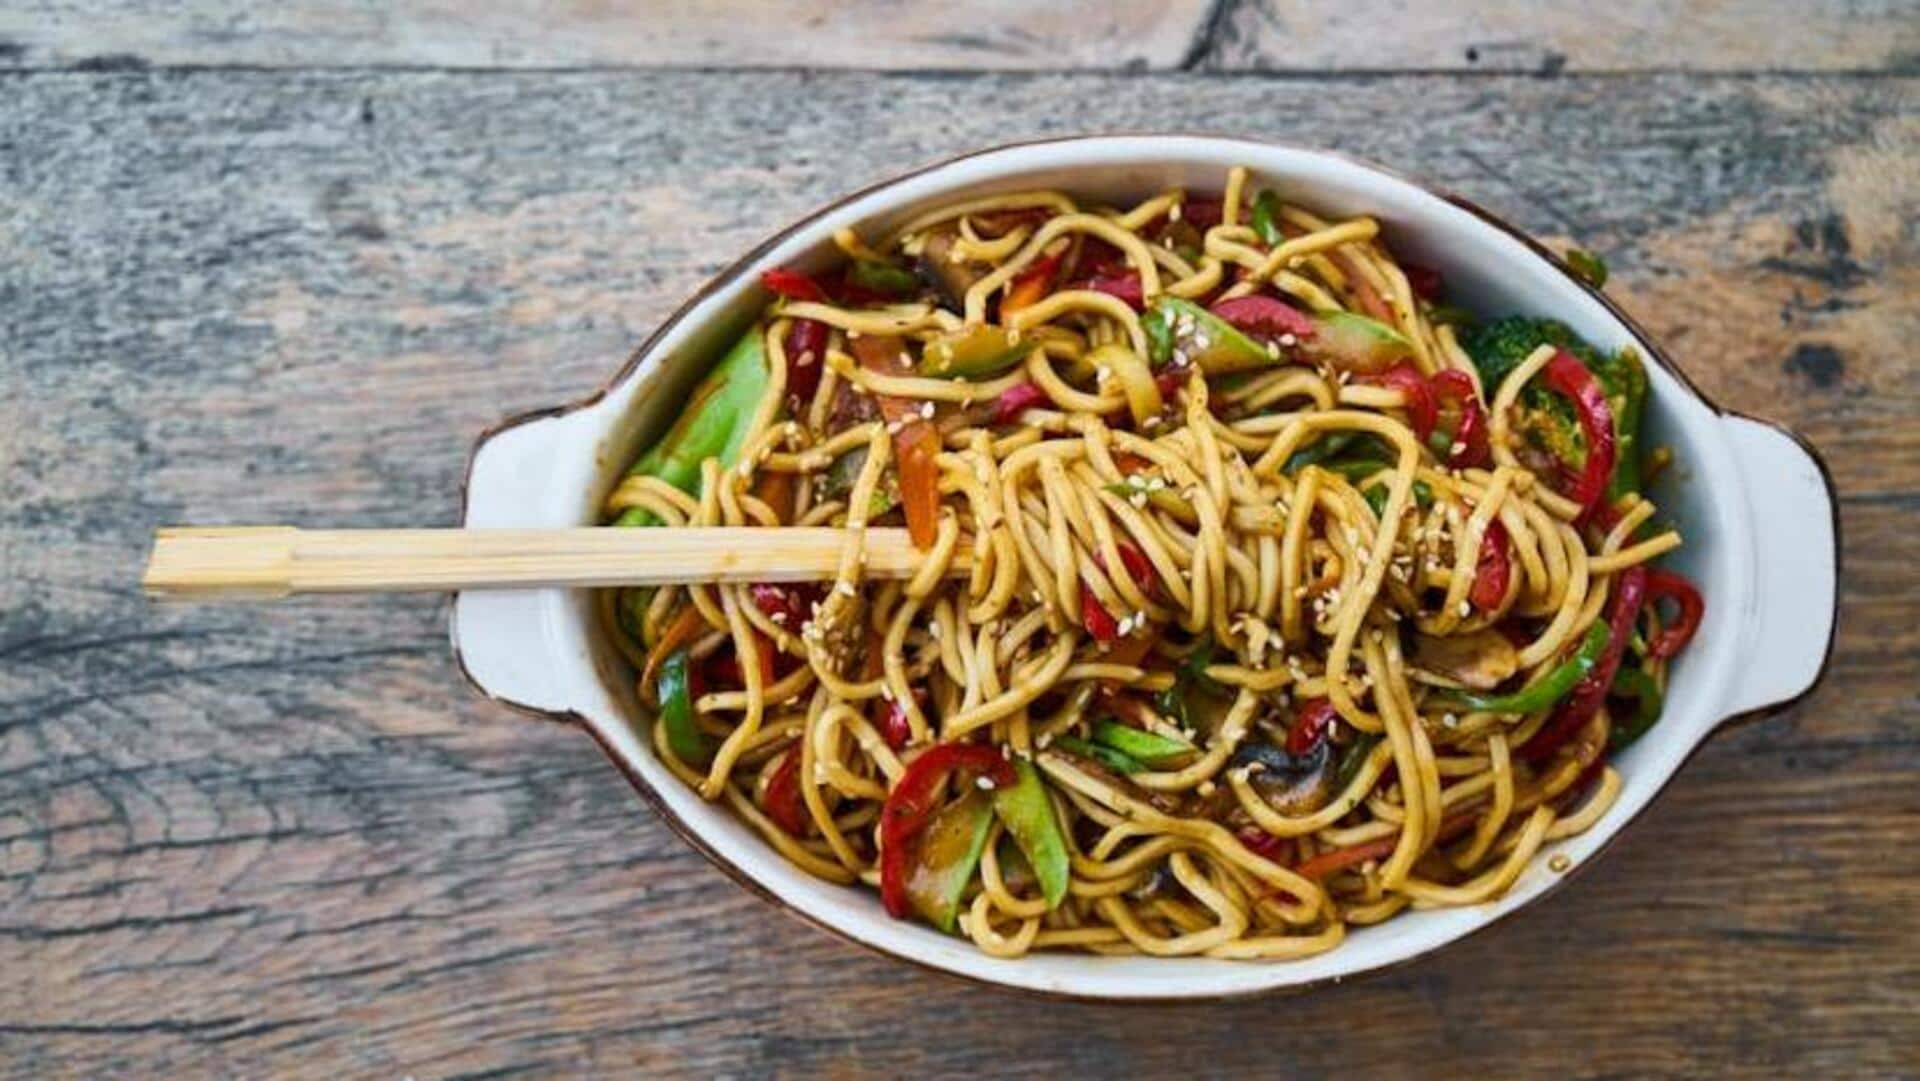 Cook delicious sweet potato noodles with this recipe